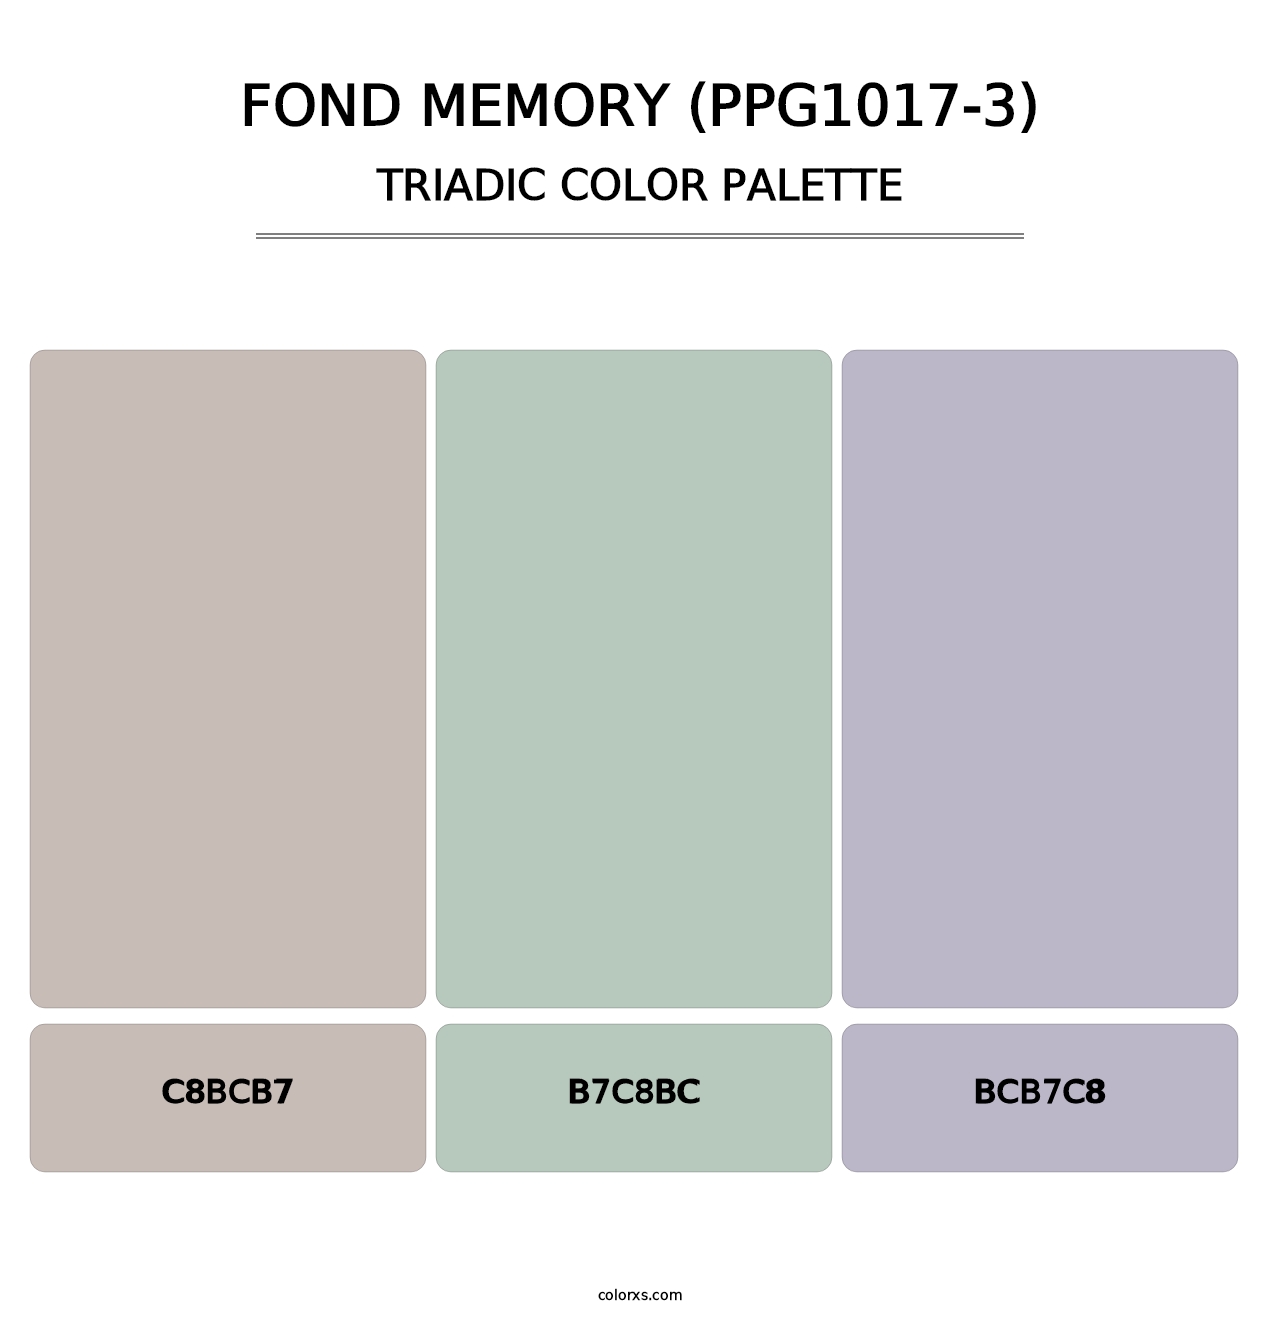 Fond Memory (PPG1017-3) - Triadic Color Palette